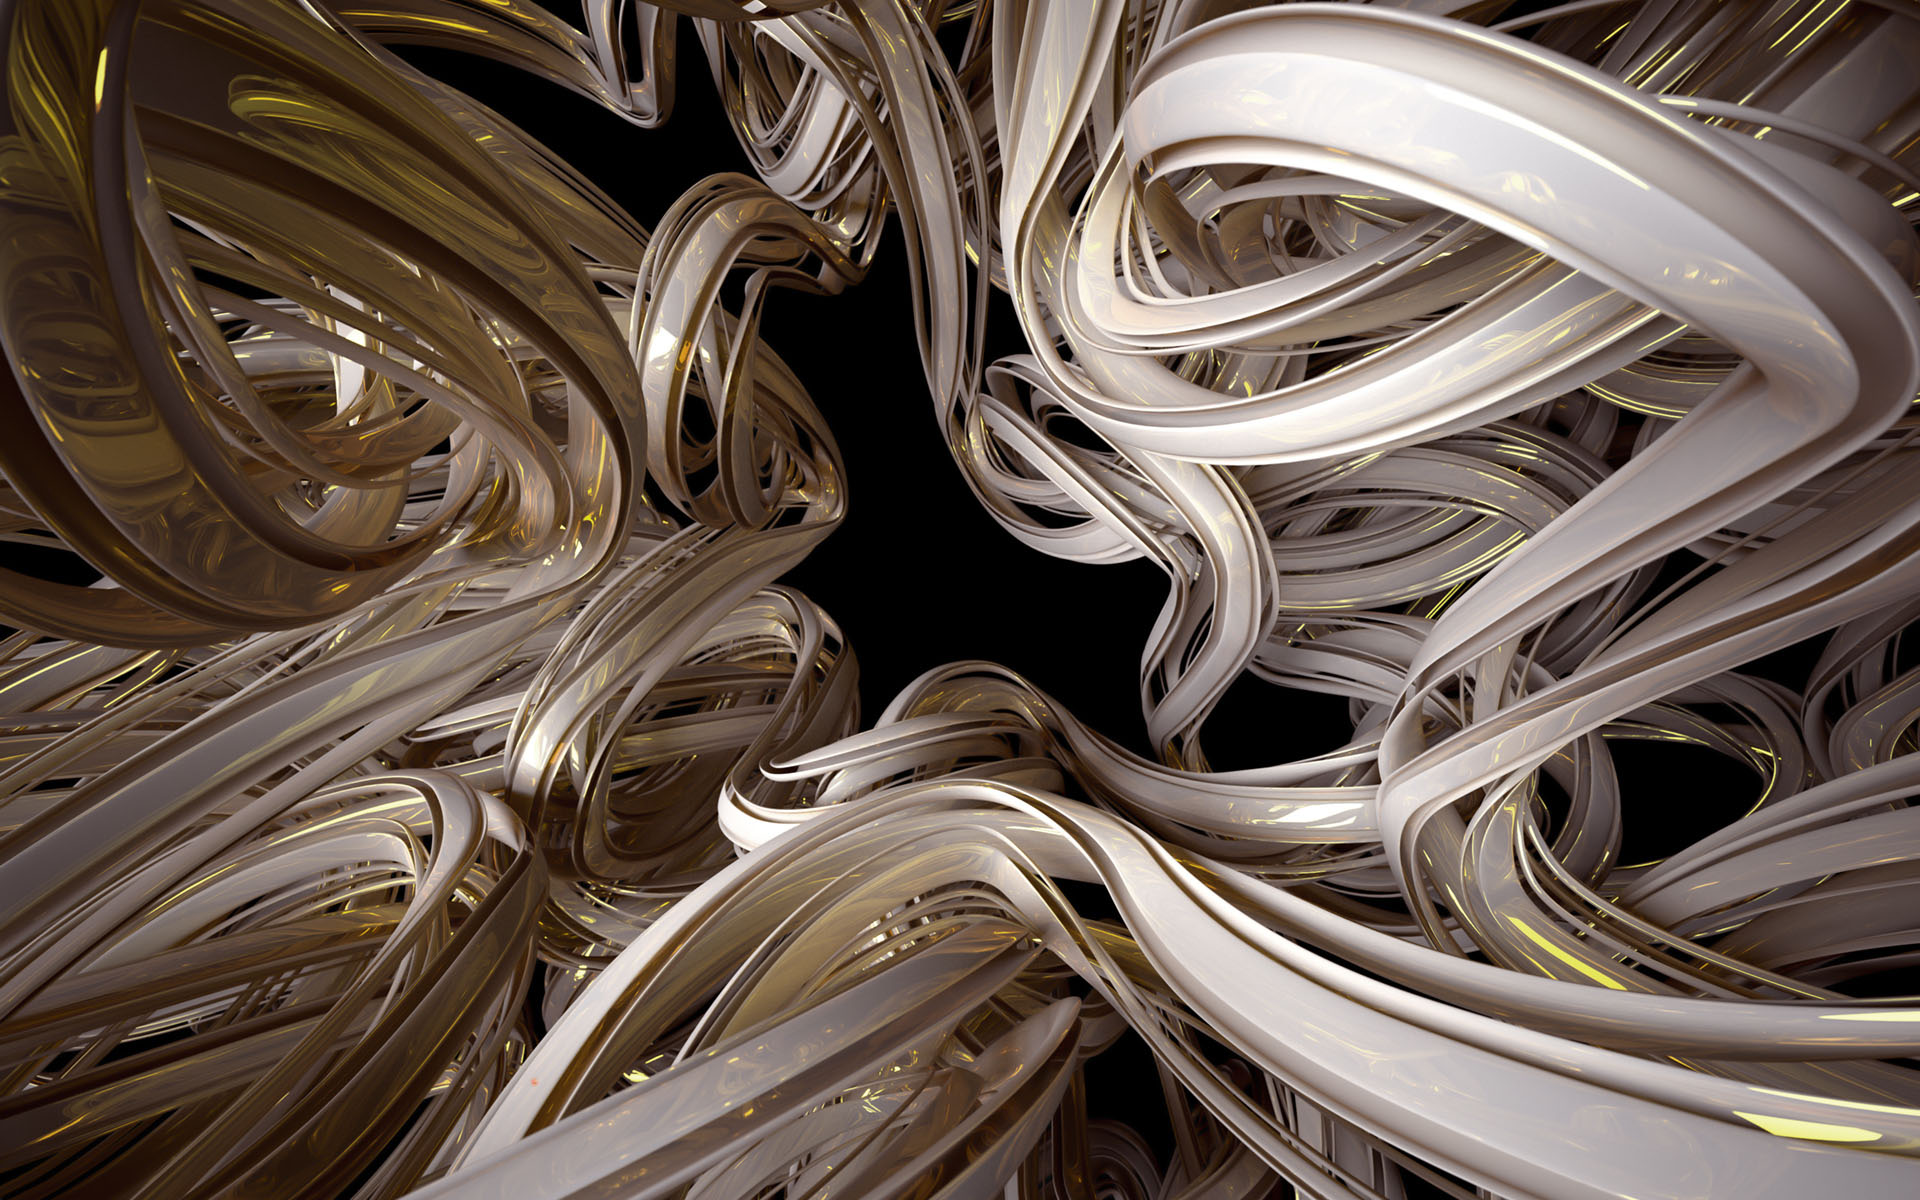 Abstract 3d wallpapers